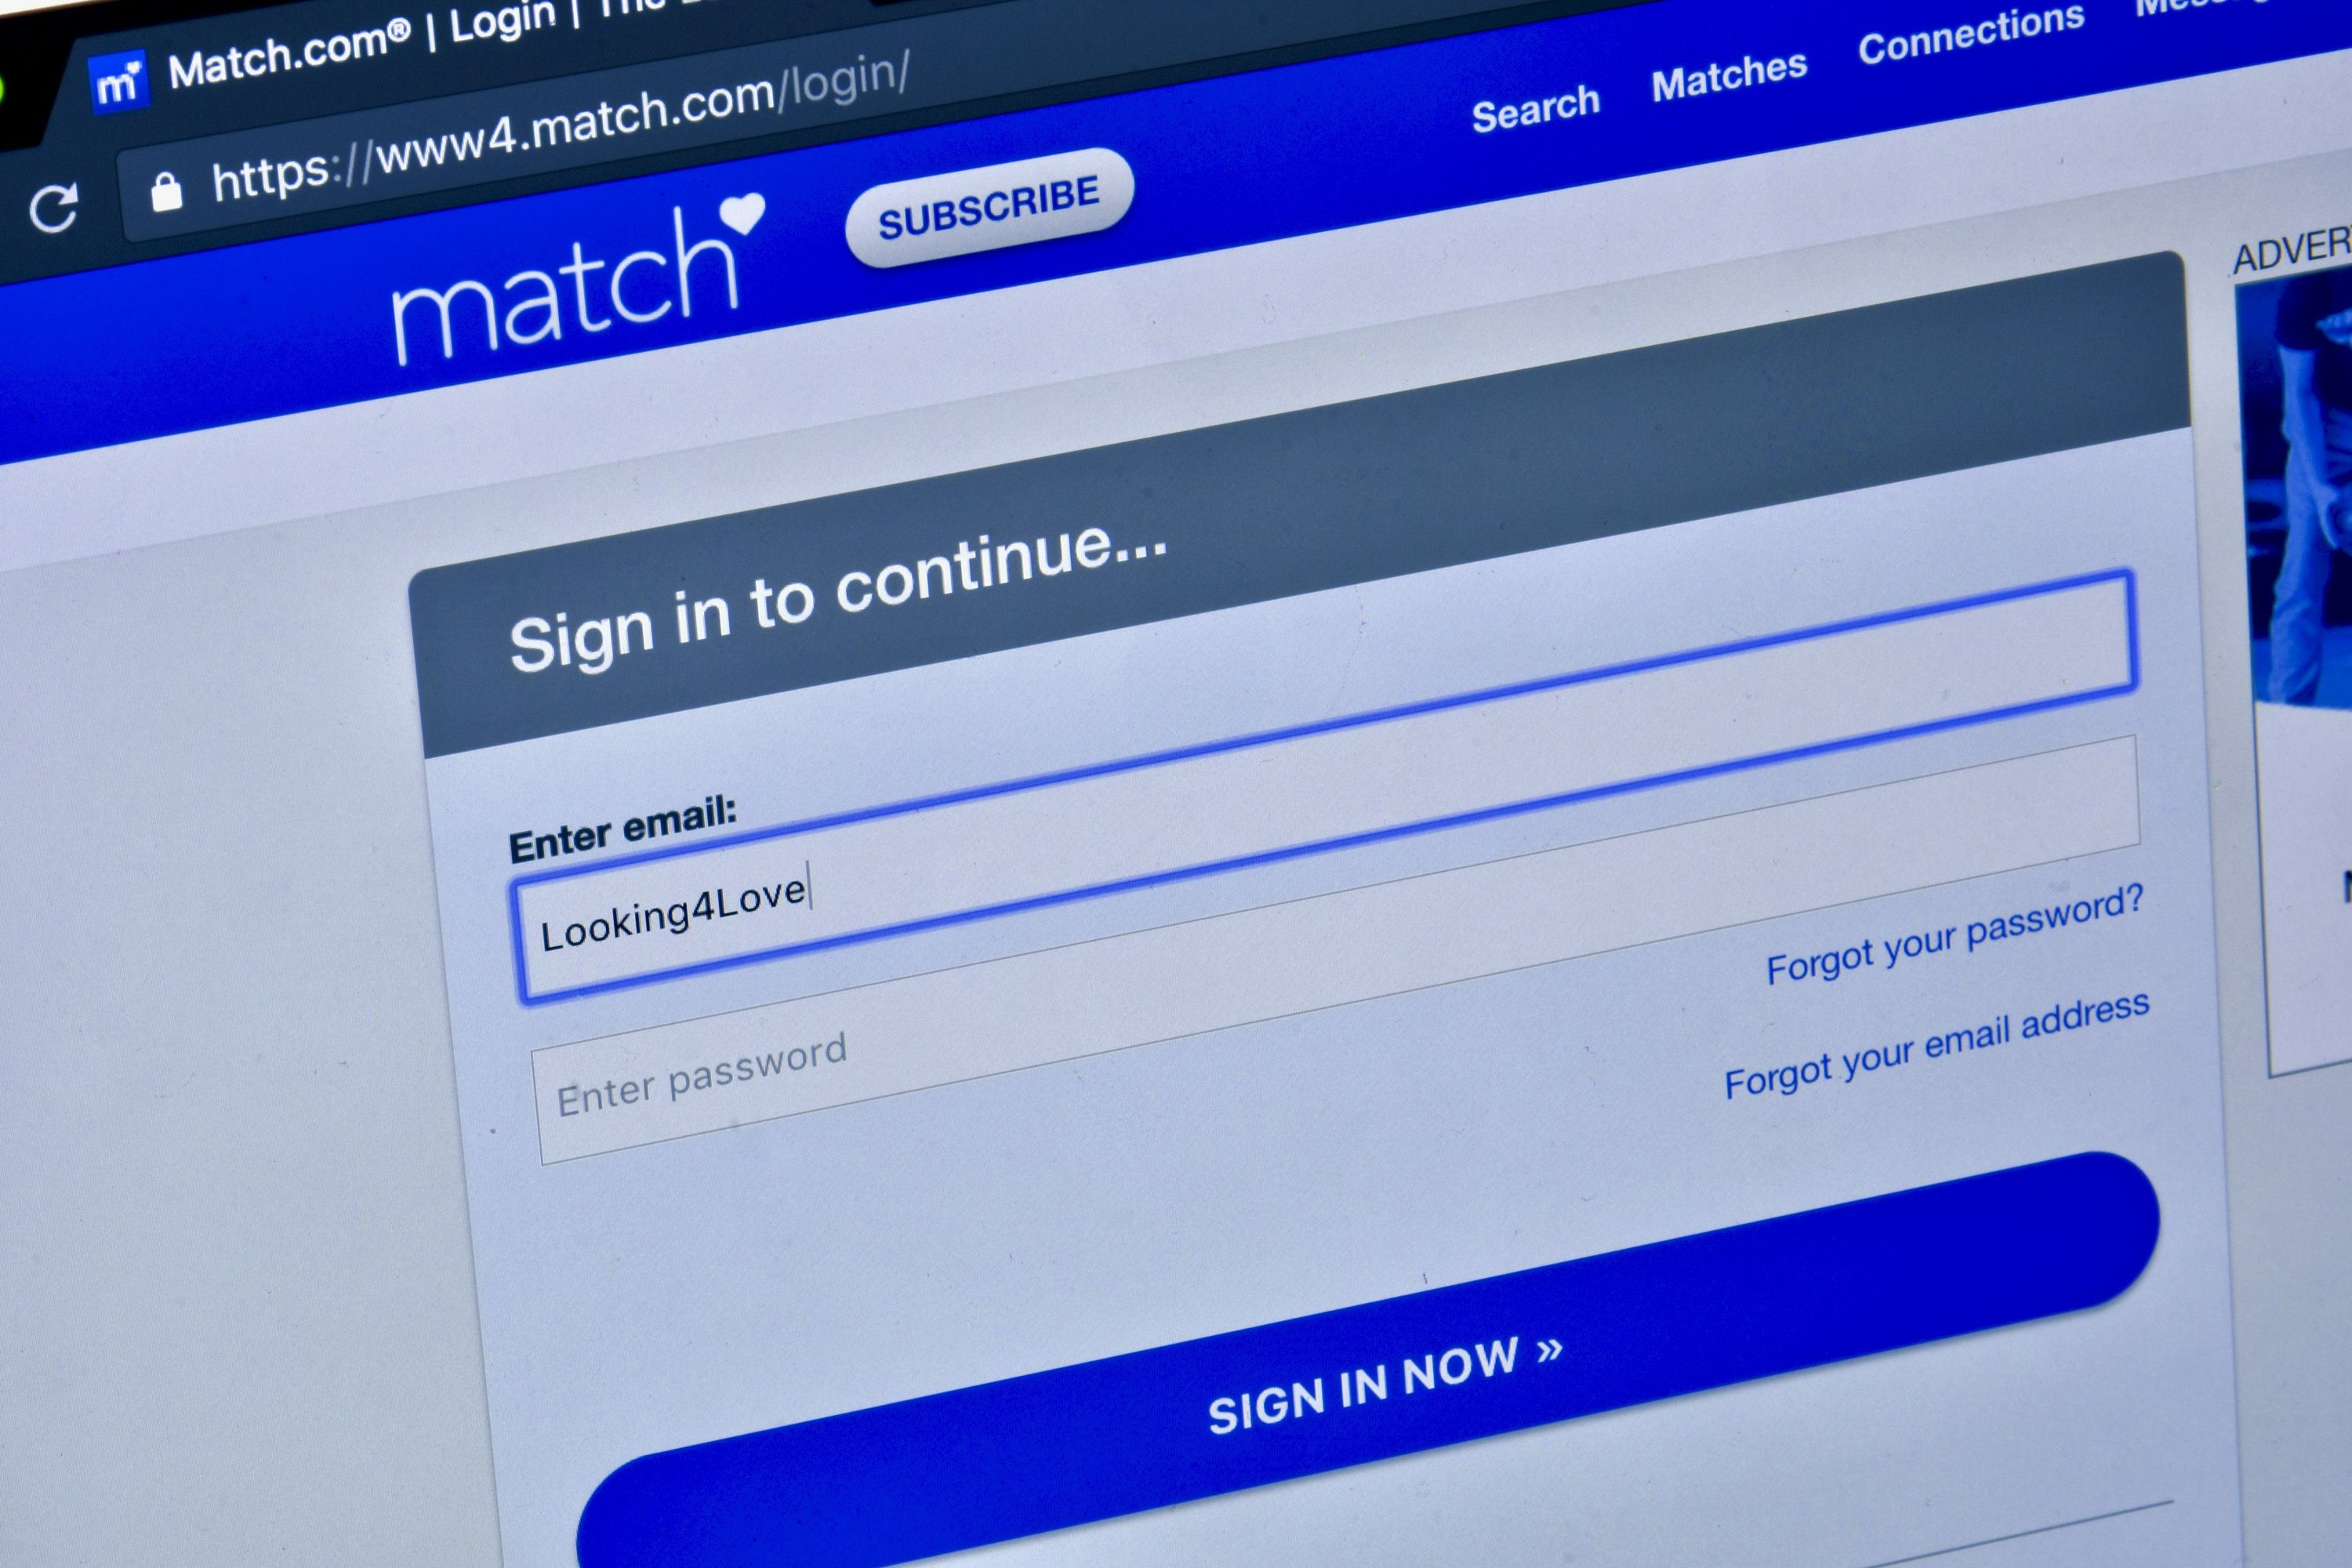 Open your browser and go to match.com. 